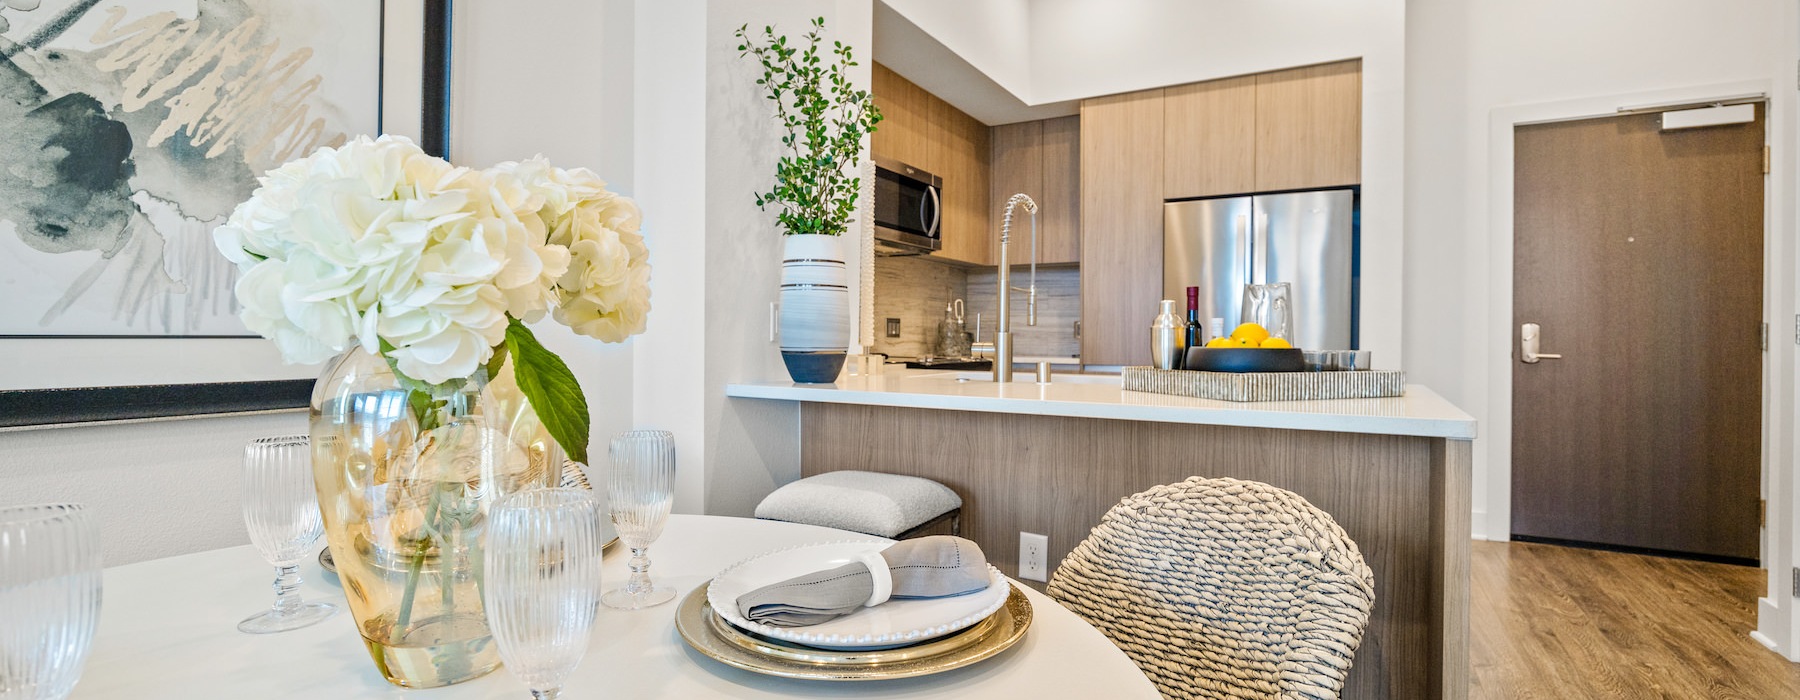 Chef-inspired kitchen with dining table